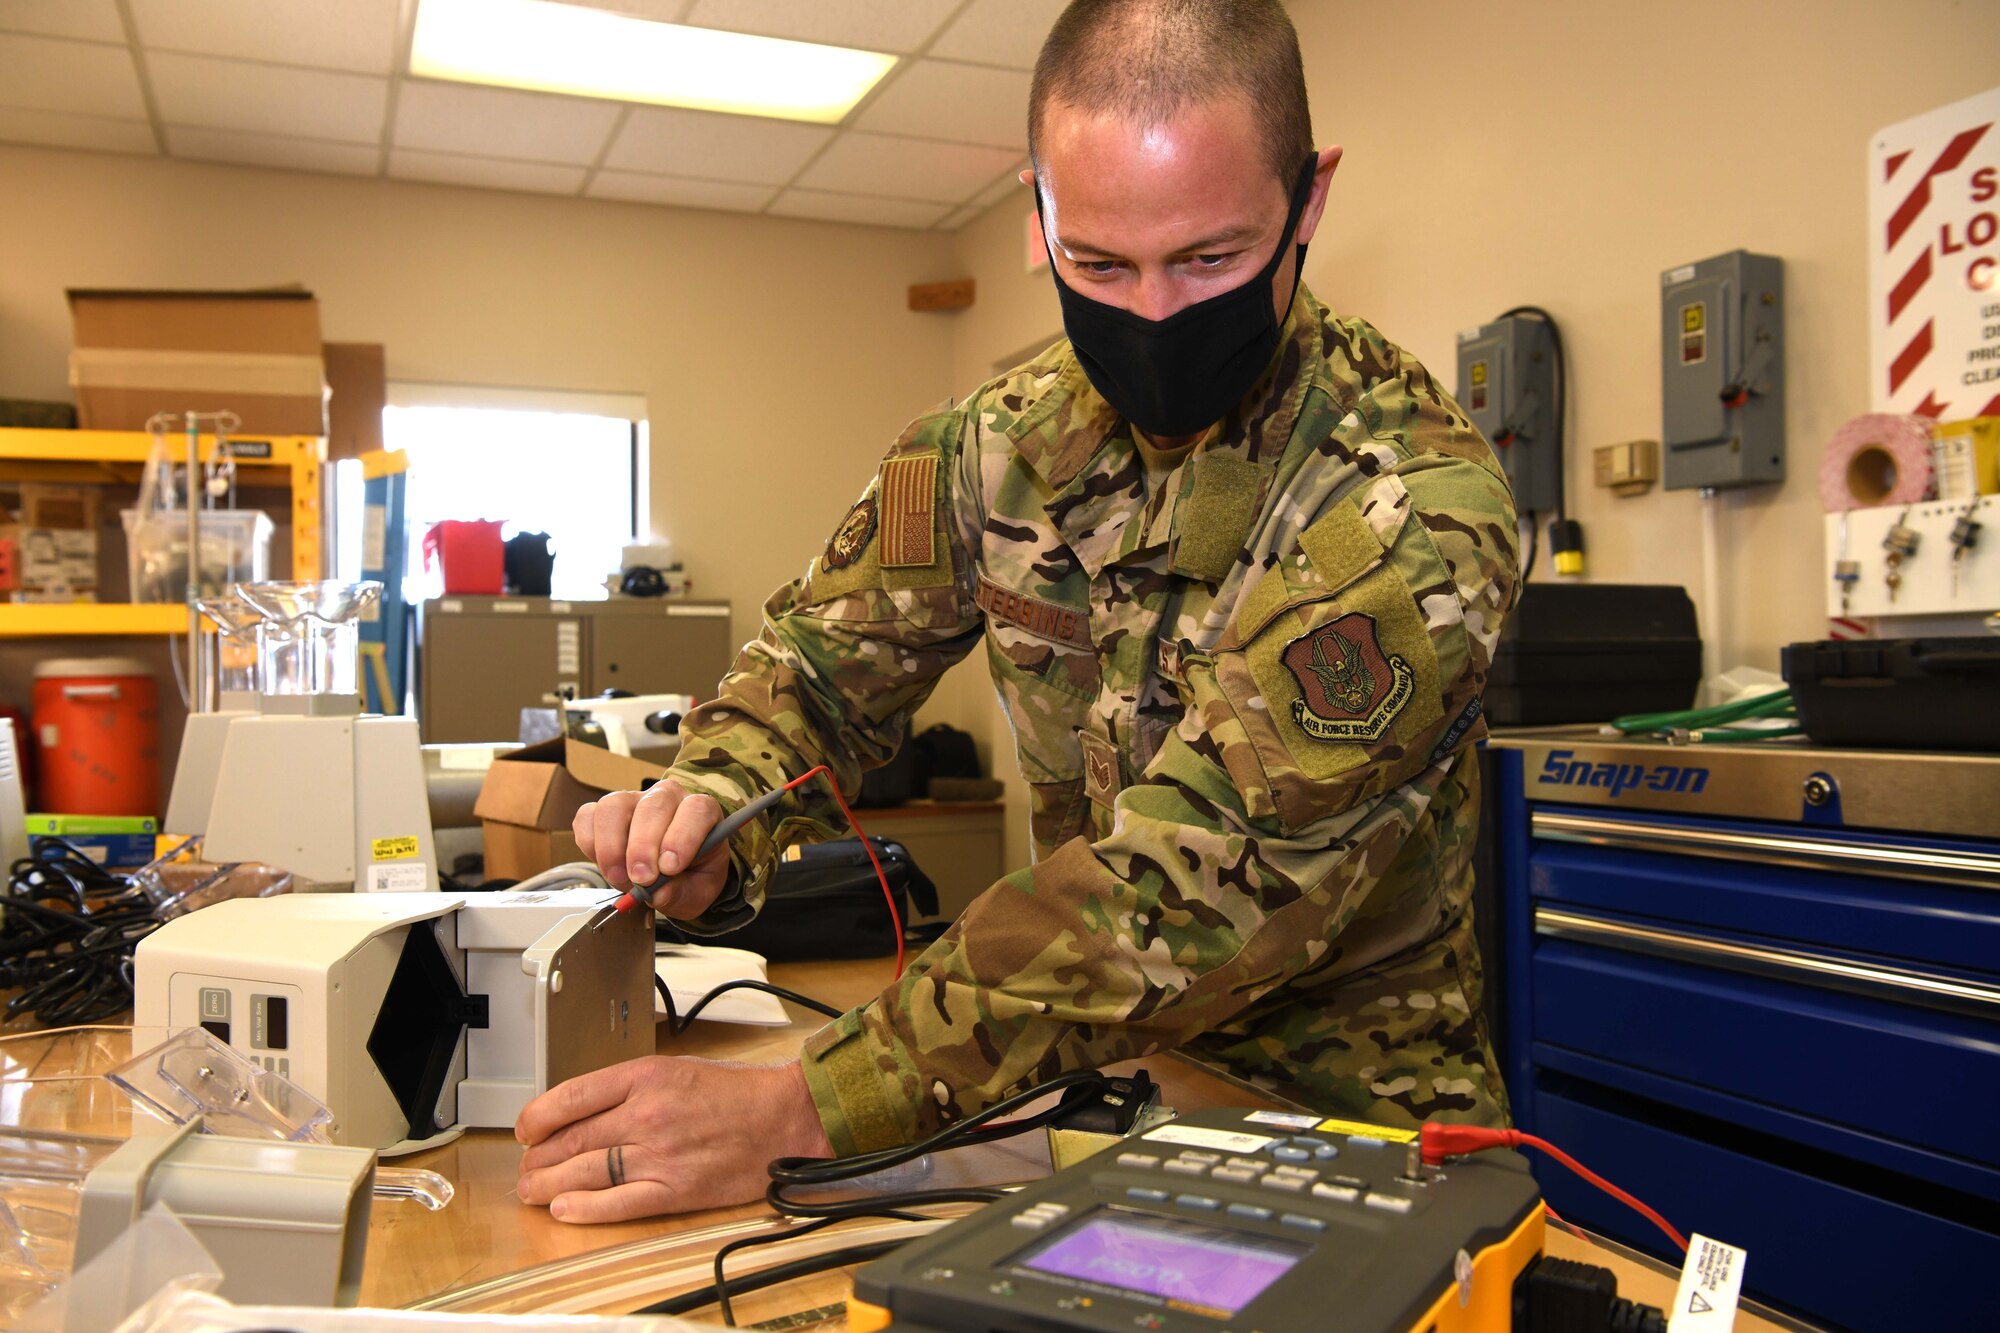 Luke Air Force Base, Ariz. – Staff Sgt. Cliff Stebbins, 944th Aeromedical Staging Squadron biomedical technician, measures the electrical current and resistance on a pill counter using a digital multimeter at Luke Air Force Base, Ariz., Nov. 9, 2020. The BMET Airmen are responsible for keeping medical equipment serviceable and configured to safety standards to ensure proper operation during daily use and emergency requirements.